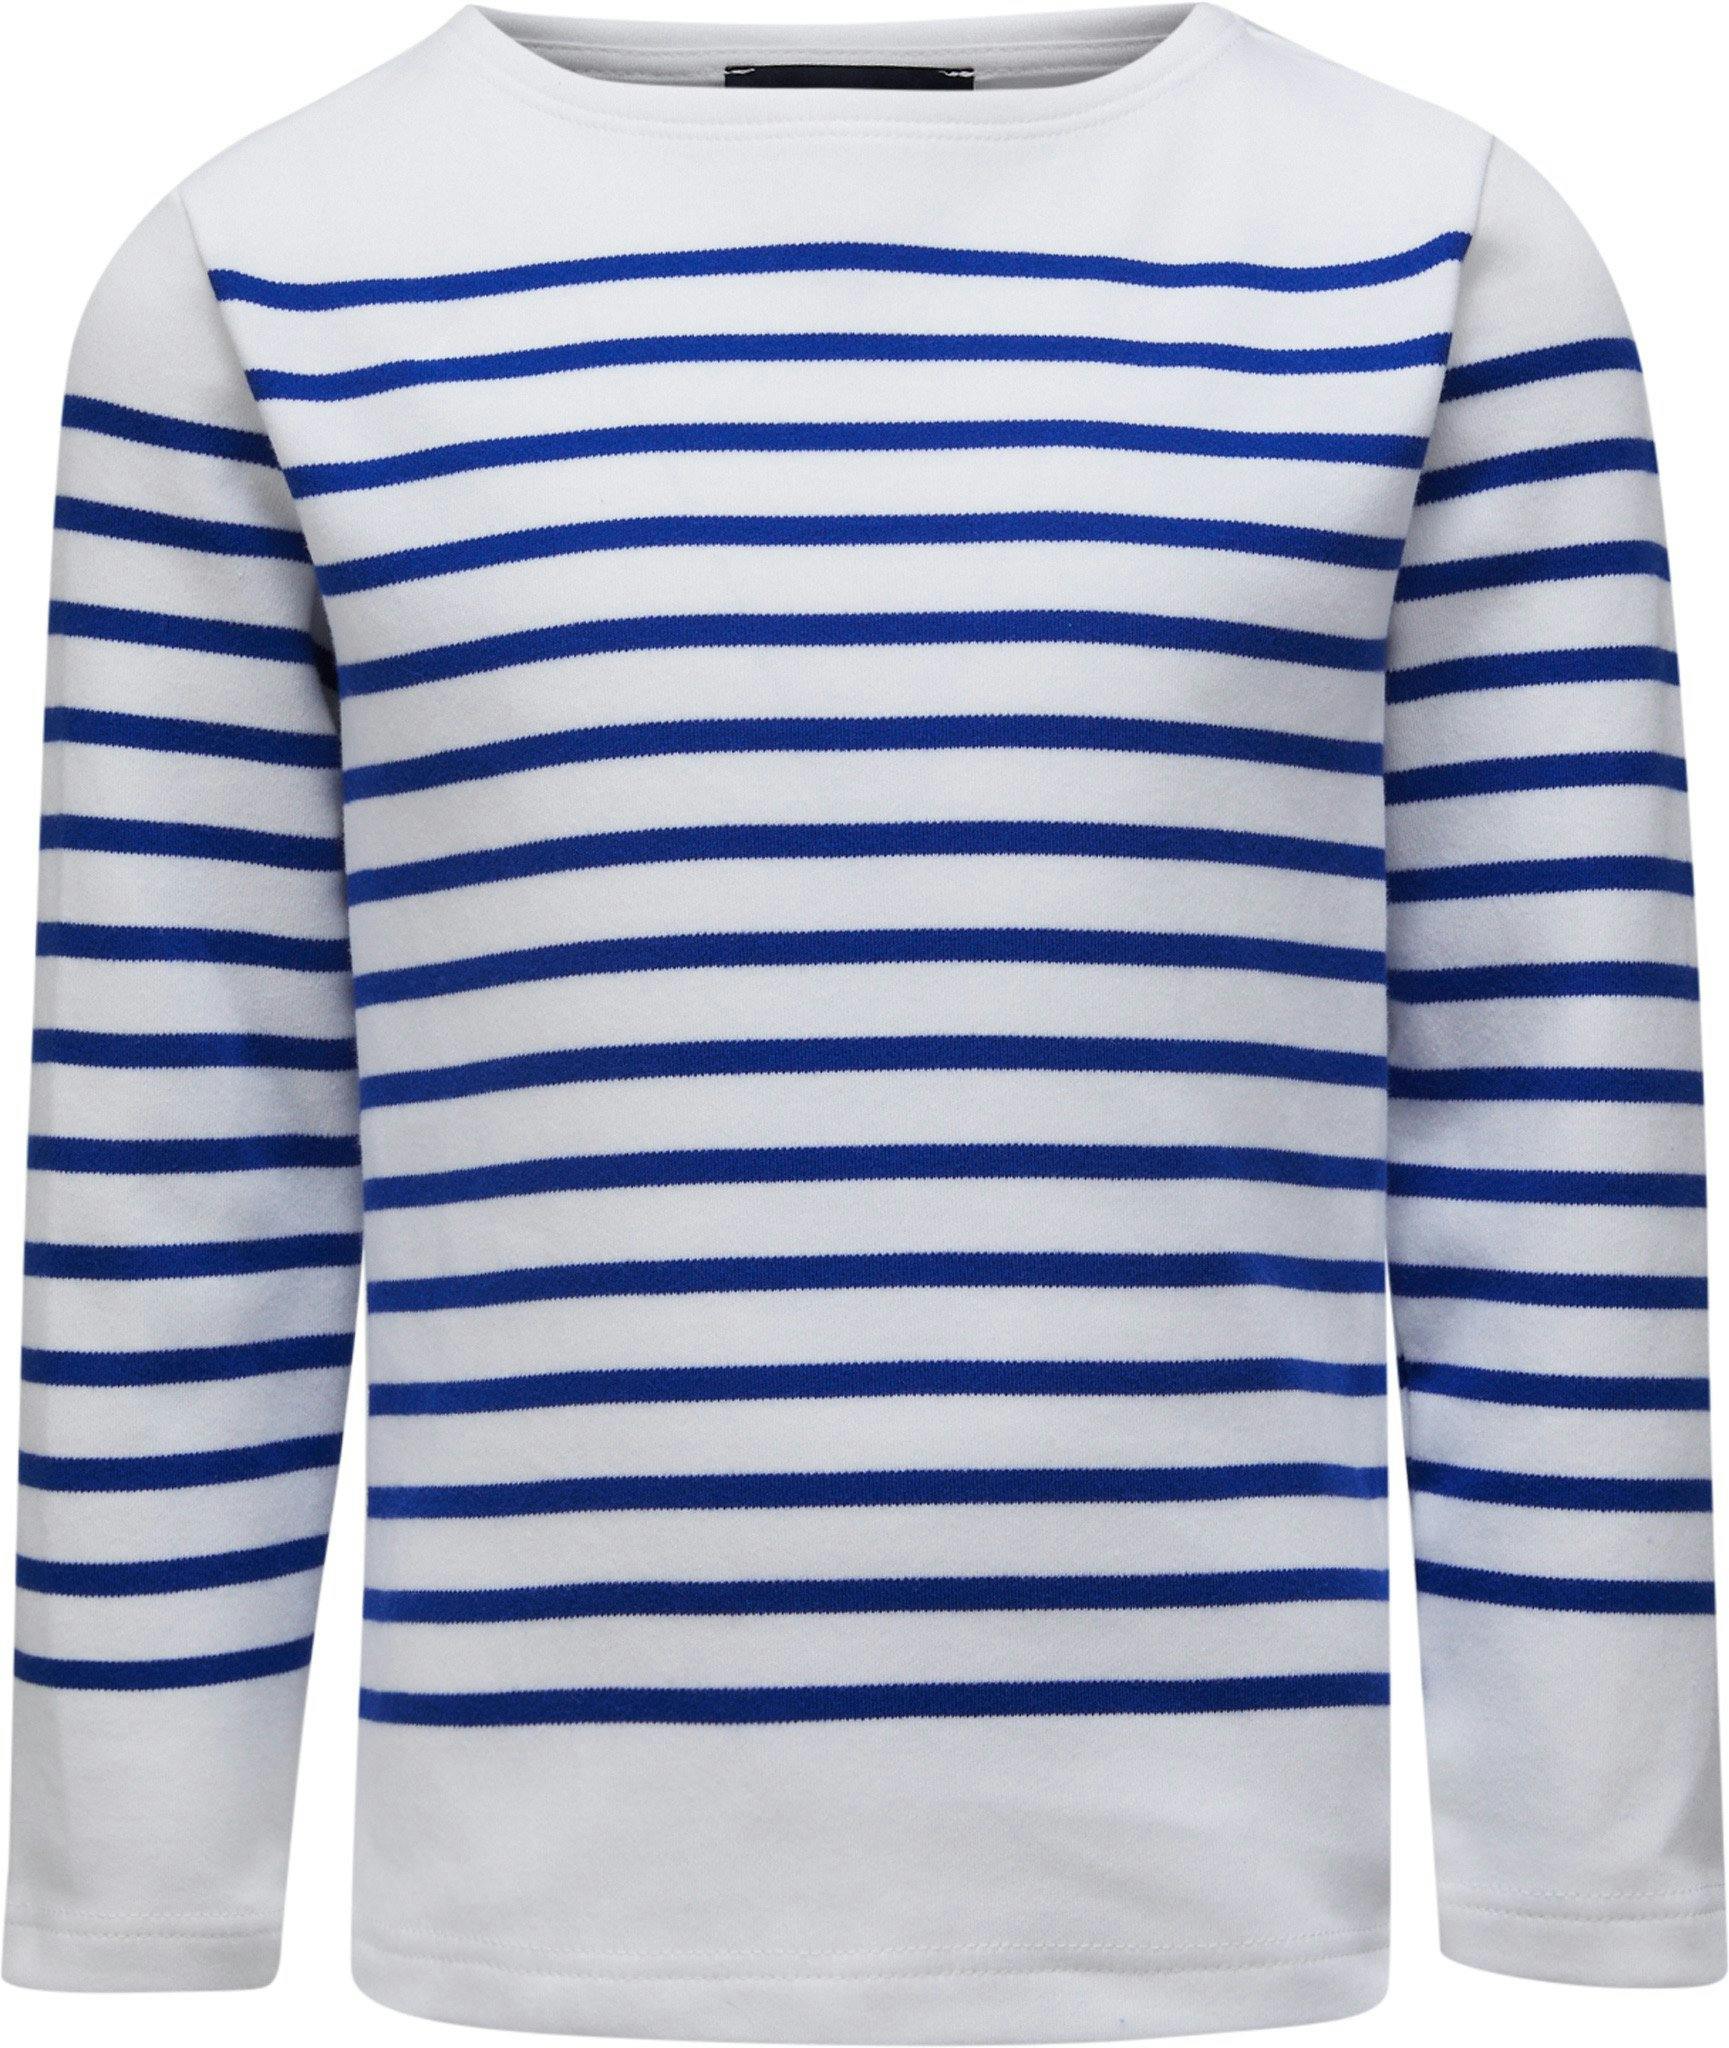 Product image for Amiral Breton Striped Jersey - Kids